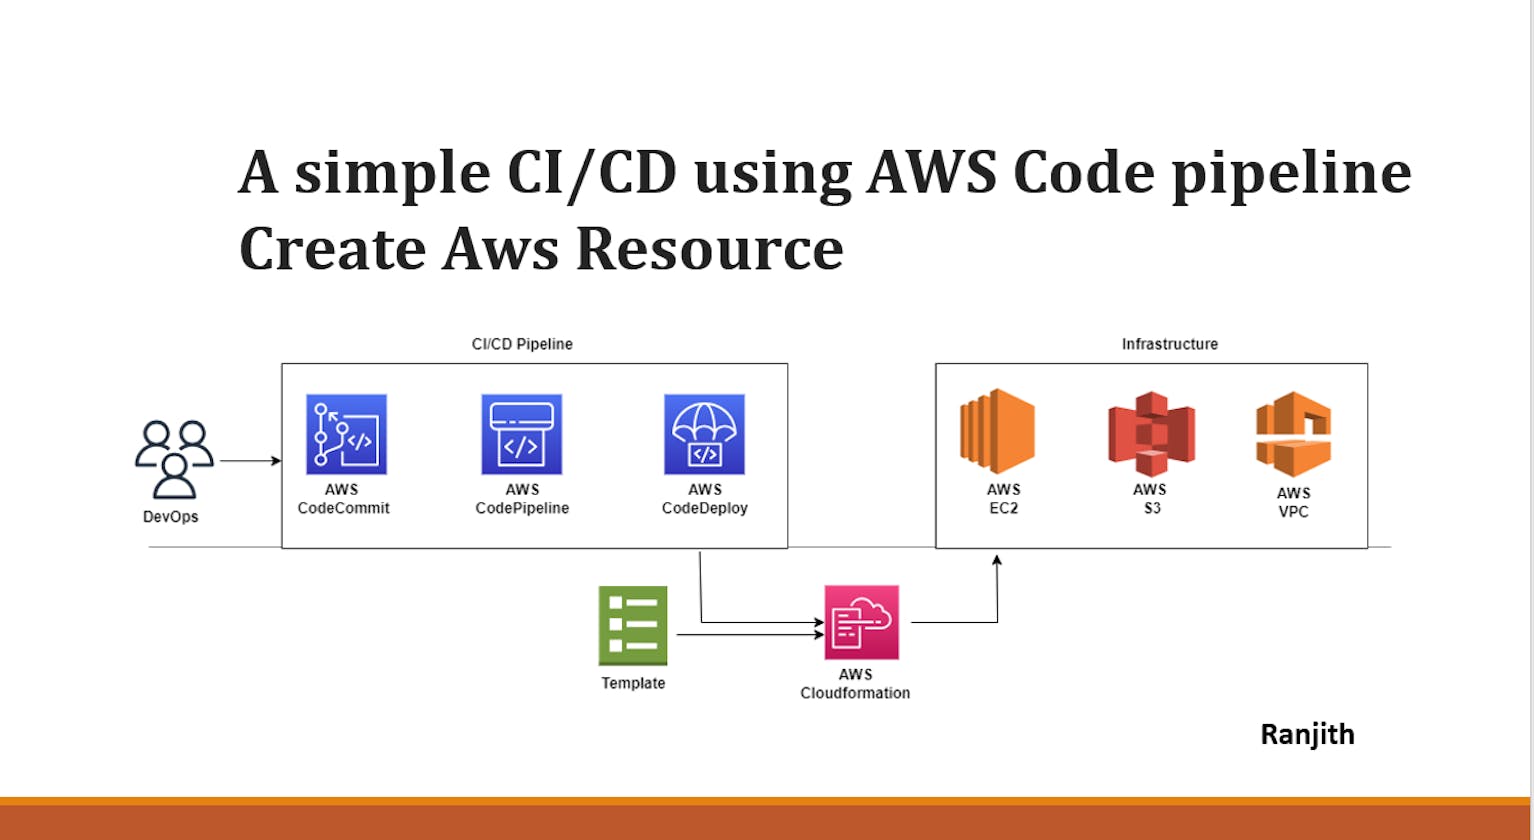 A simple CI/CD using the AWS Code pipeline